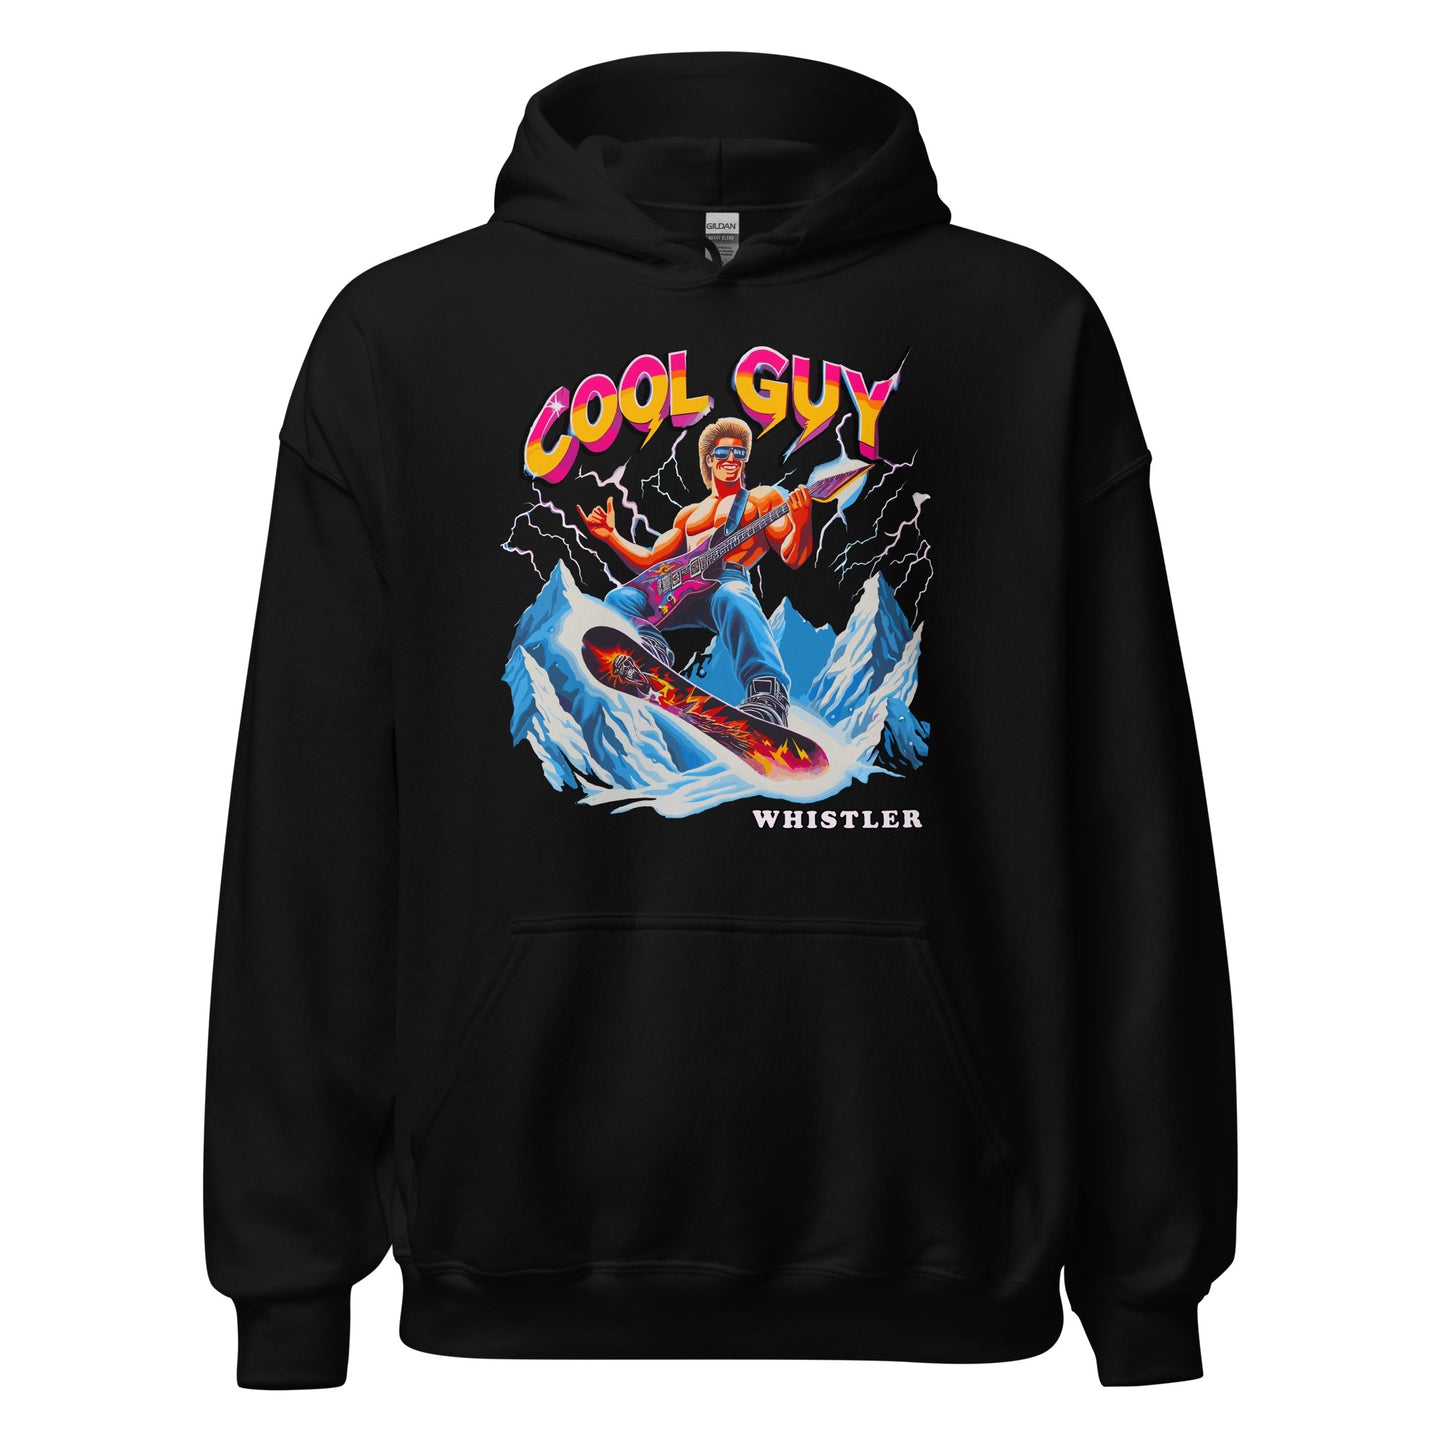 Cool Guy Whistler Hoodie printed by Whistler Shirts